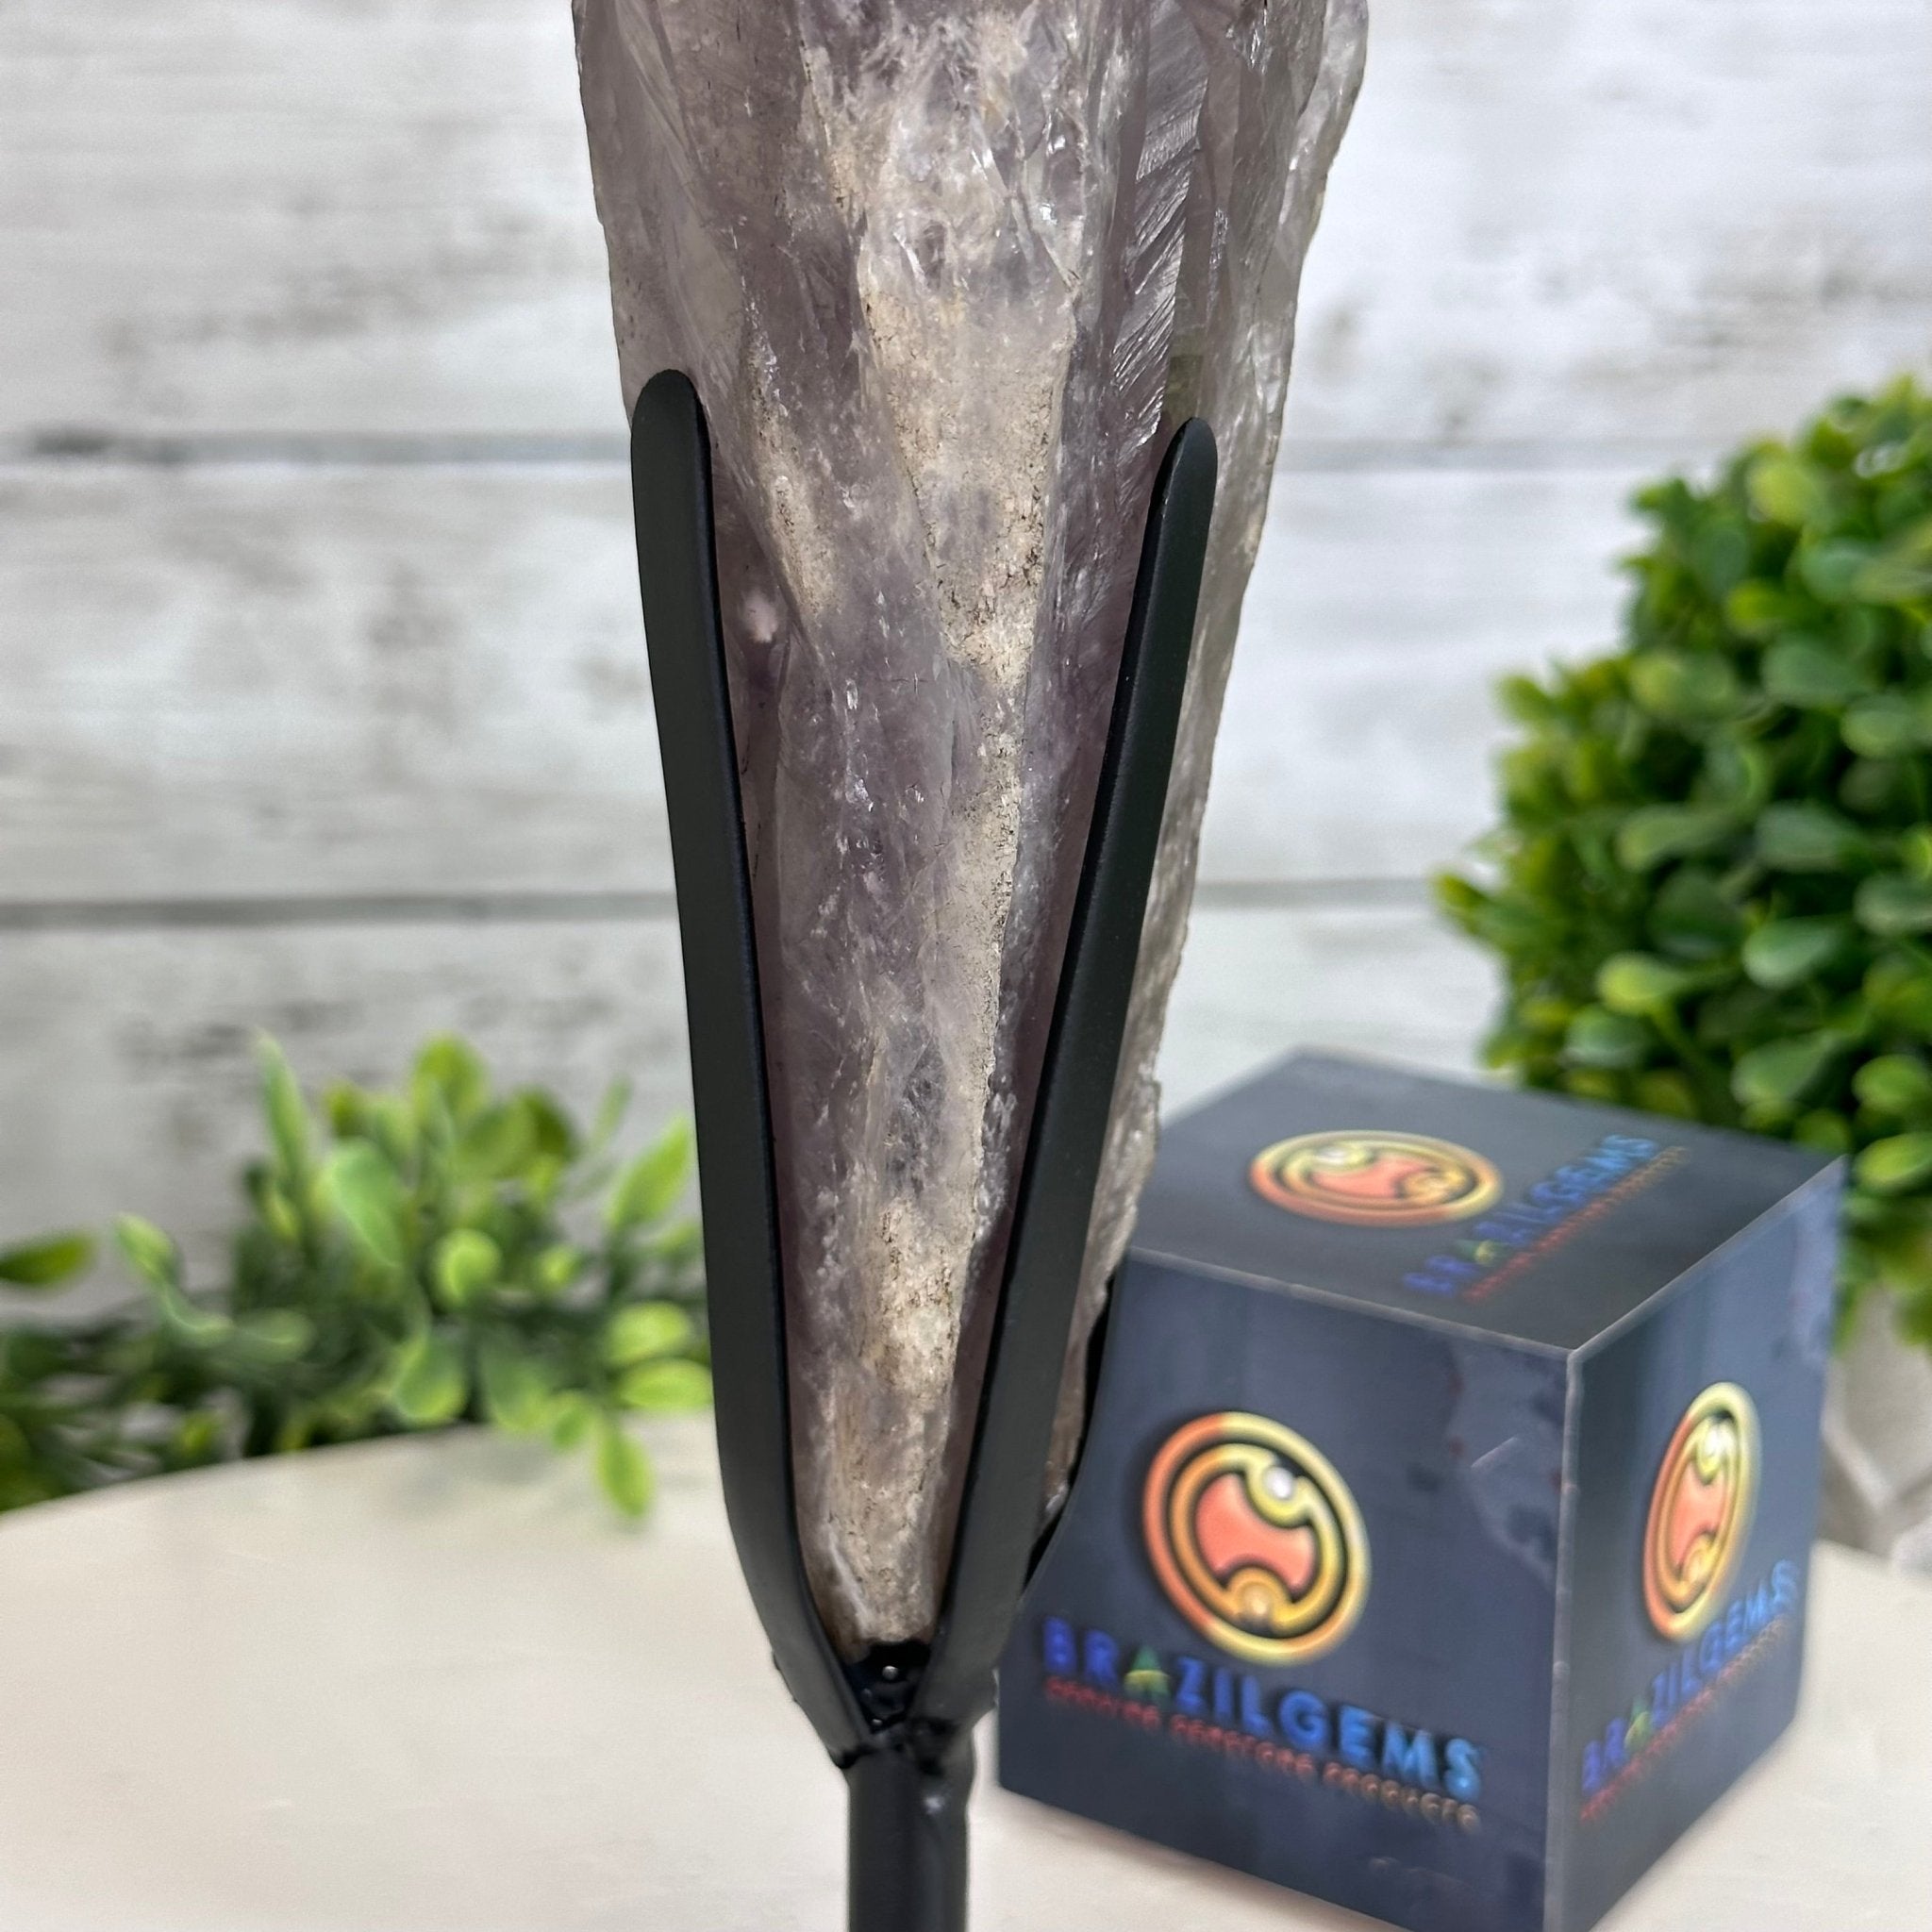 Super Quality Amethyst Wand on a Metal Stand, 2 lbs & 10.7" Tall #3123AM-009 - Brazil GemsBrazil GemsSuper Quality Amethyst Wand on a Metal Stand, 2 lbs & 10.7" Tall #3123AM-009Clusters on Fixed Bases3123AM-009